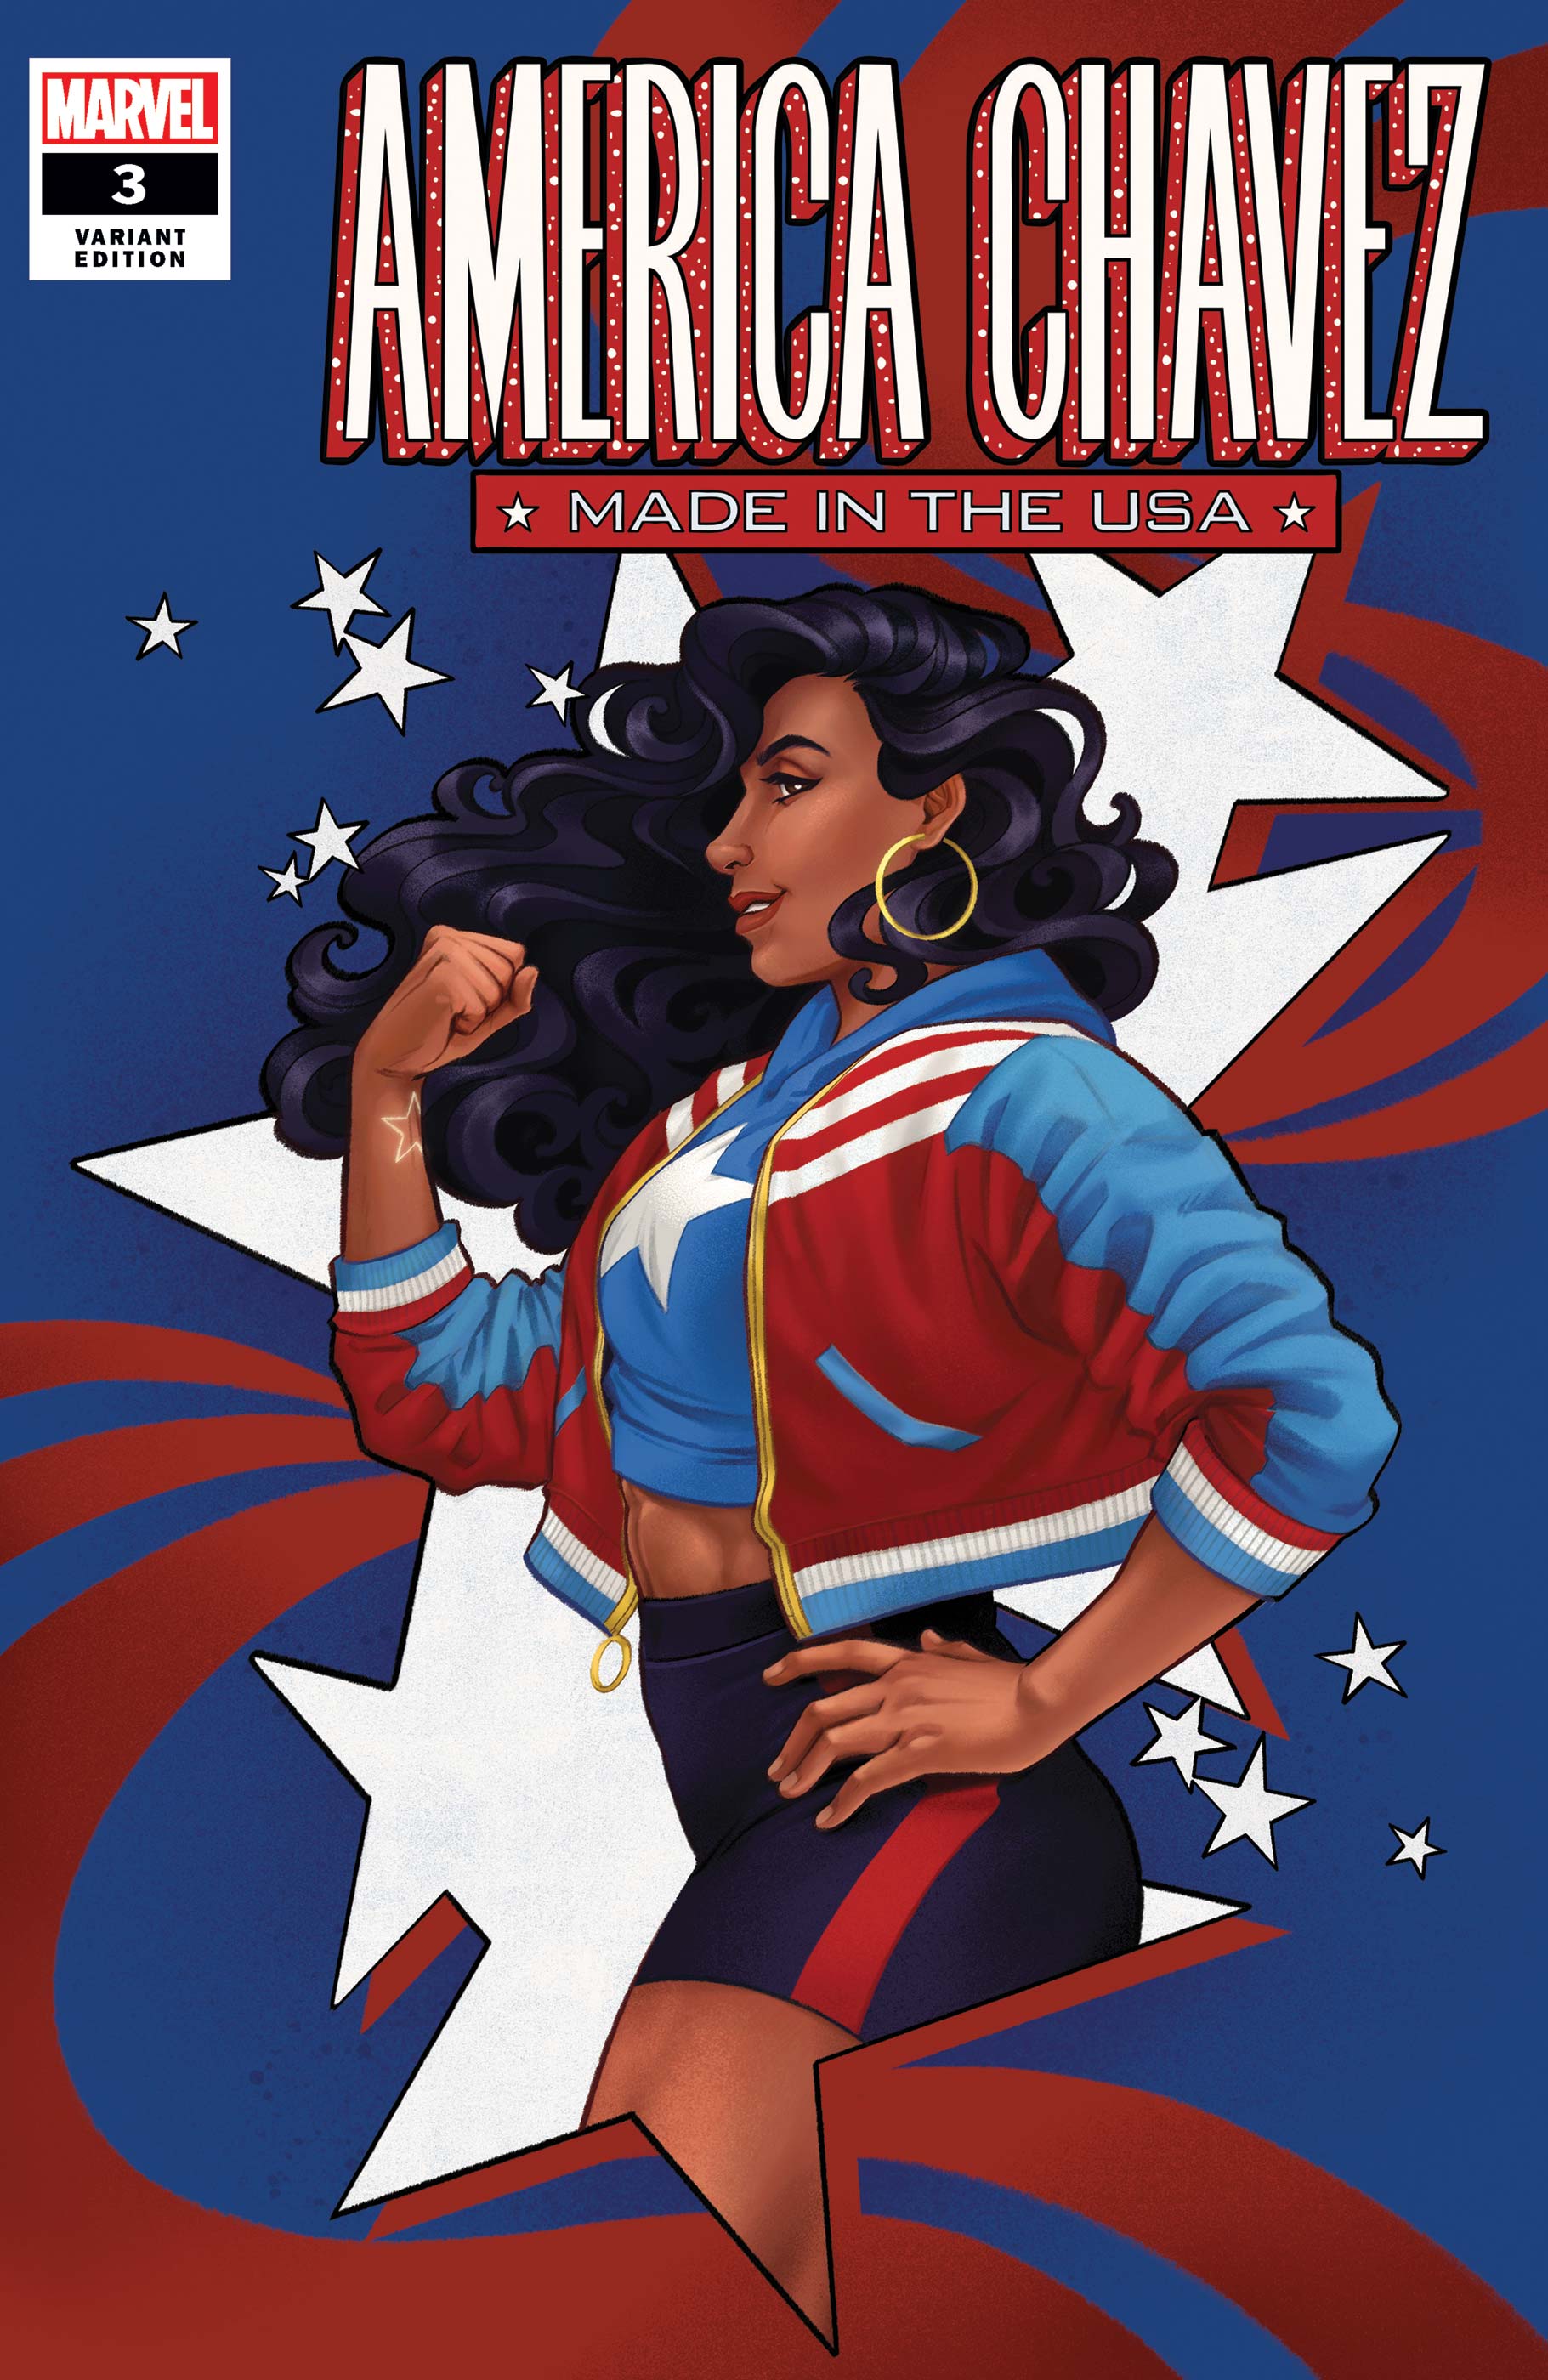 America Chavez: Made in the USA (2021) #3 (Variant)